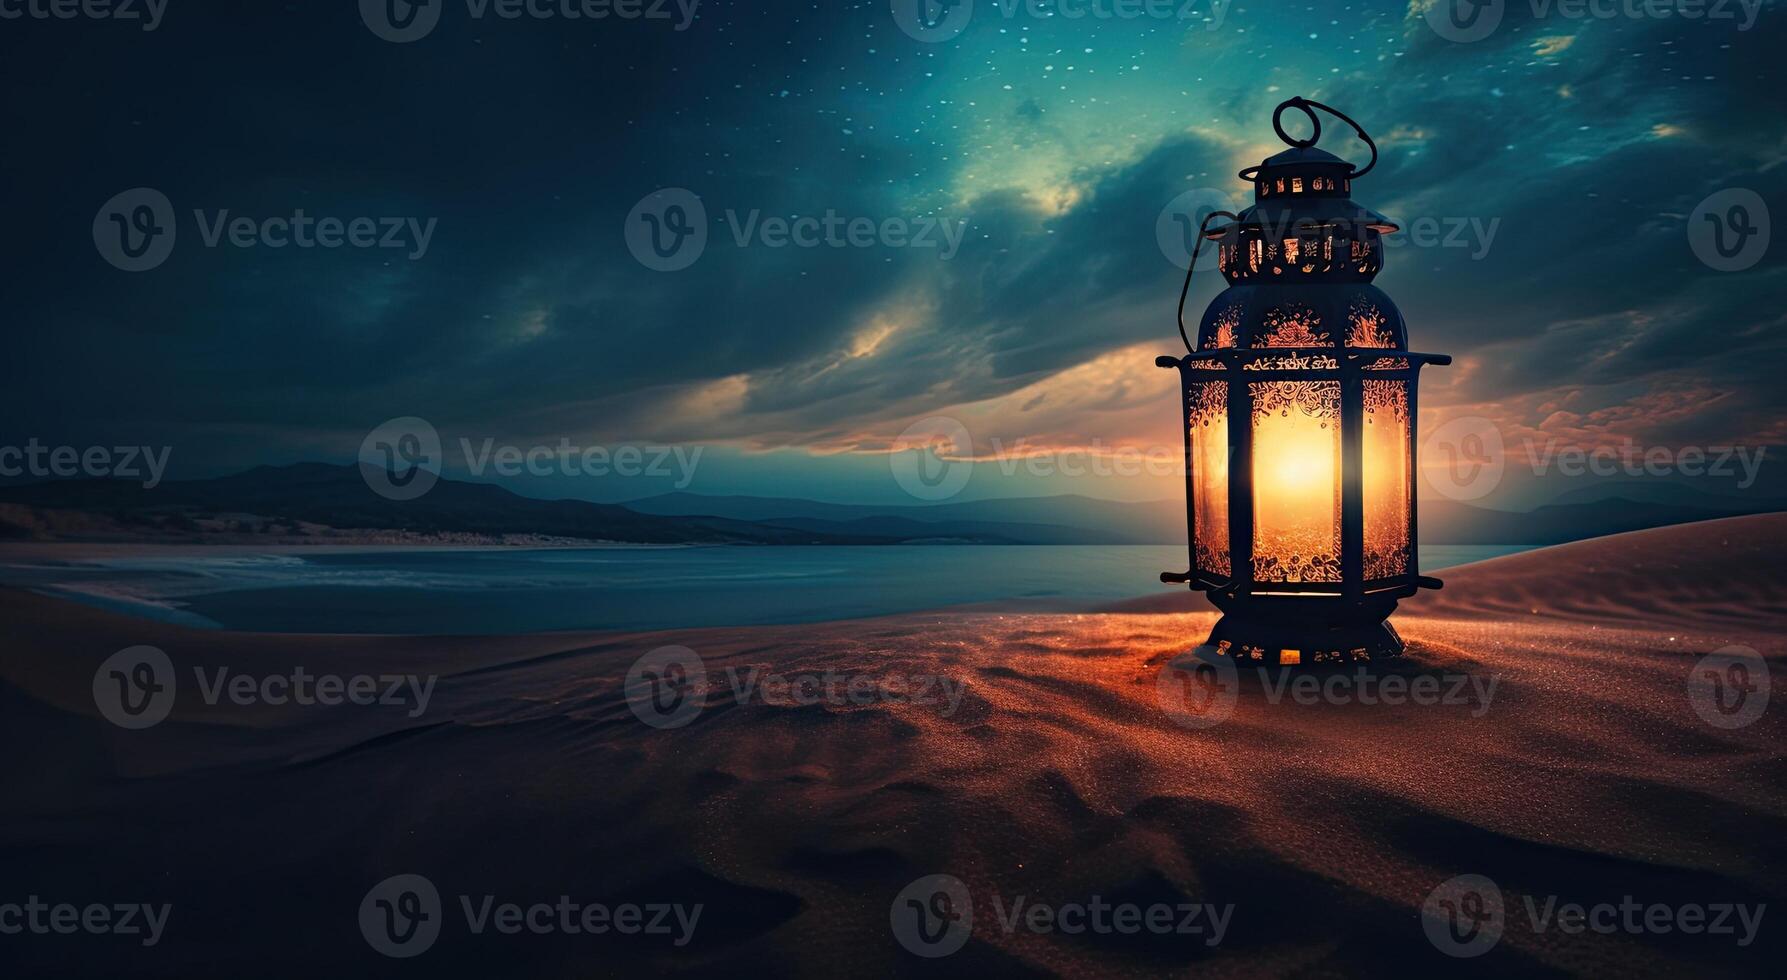 ramadan islamic lantern on desert background, in the style of romantic moonlit seascapes, blue and amber, mysterious dreamscapes, decorative paintings, Illustration photo